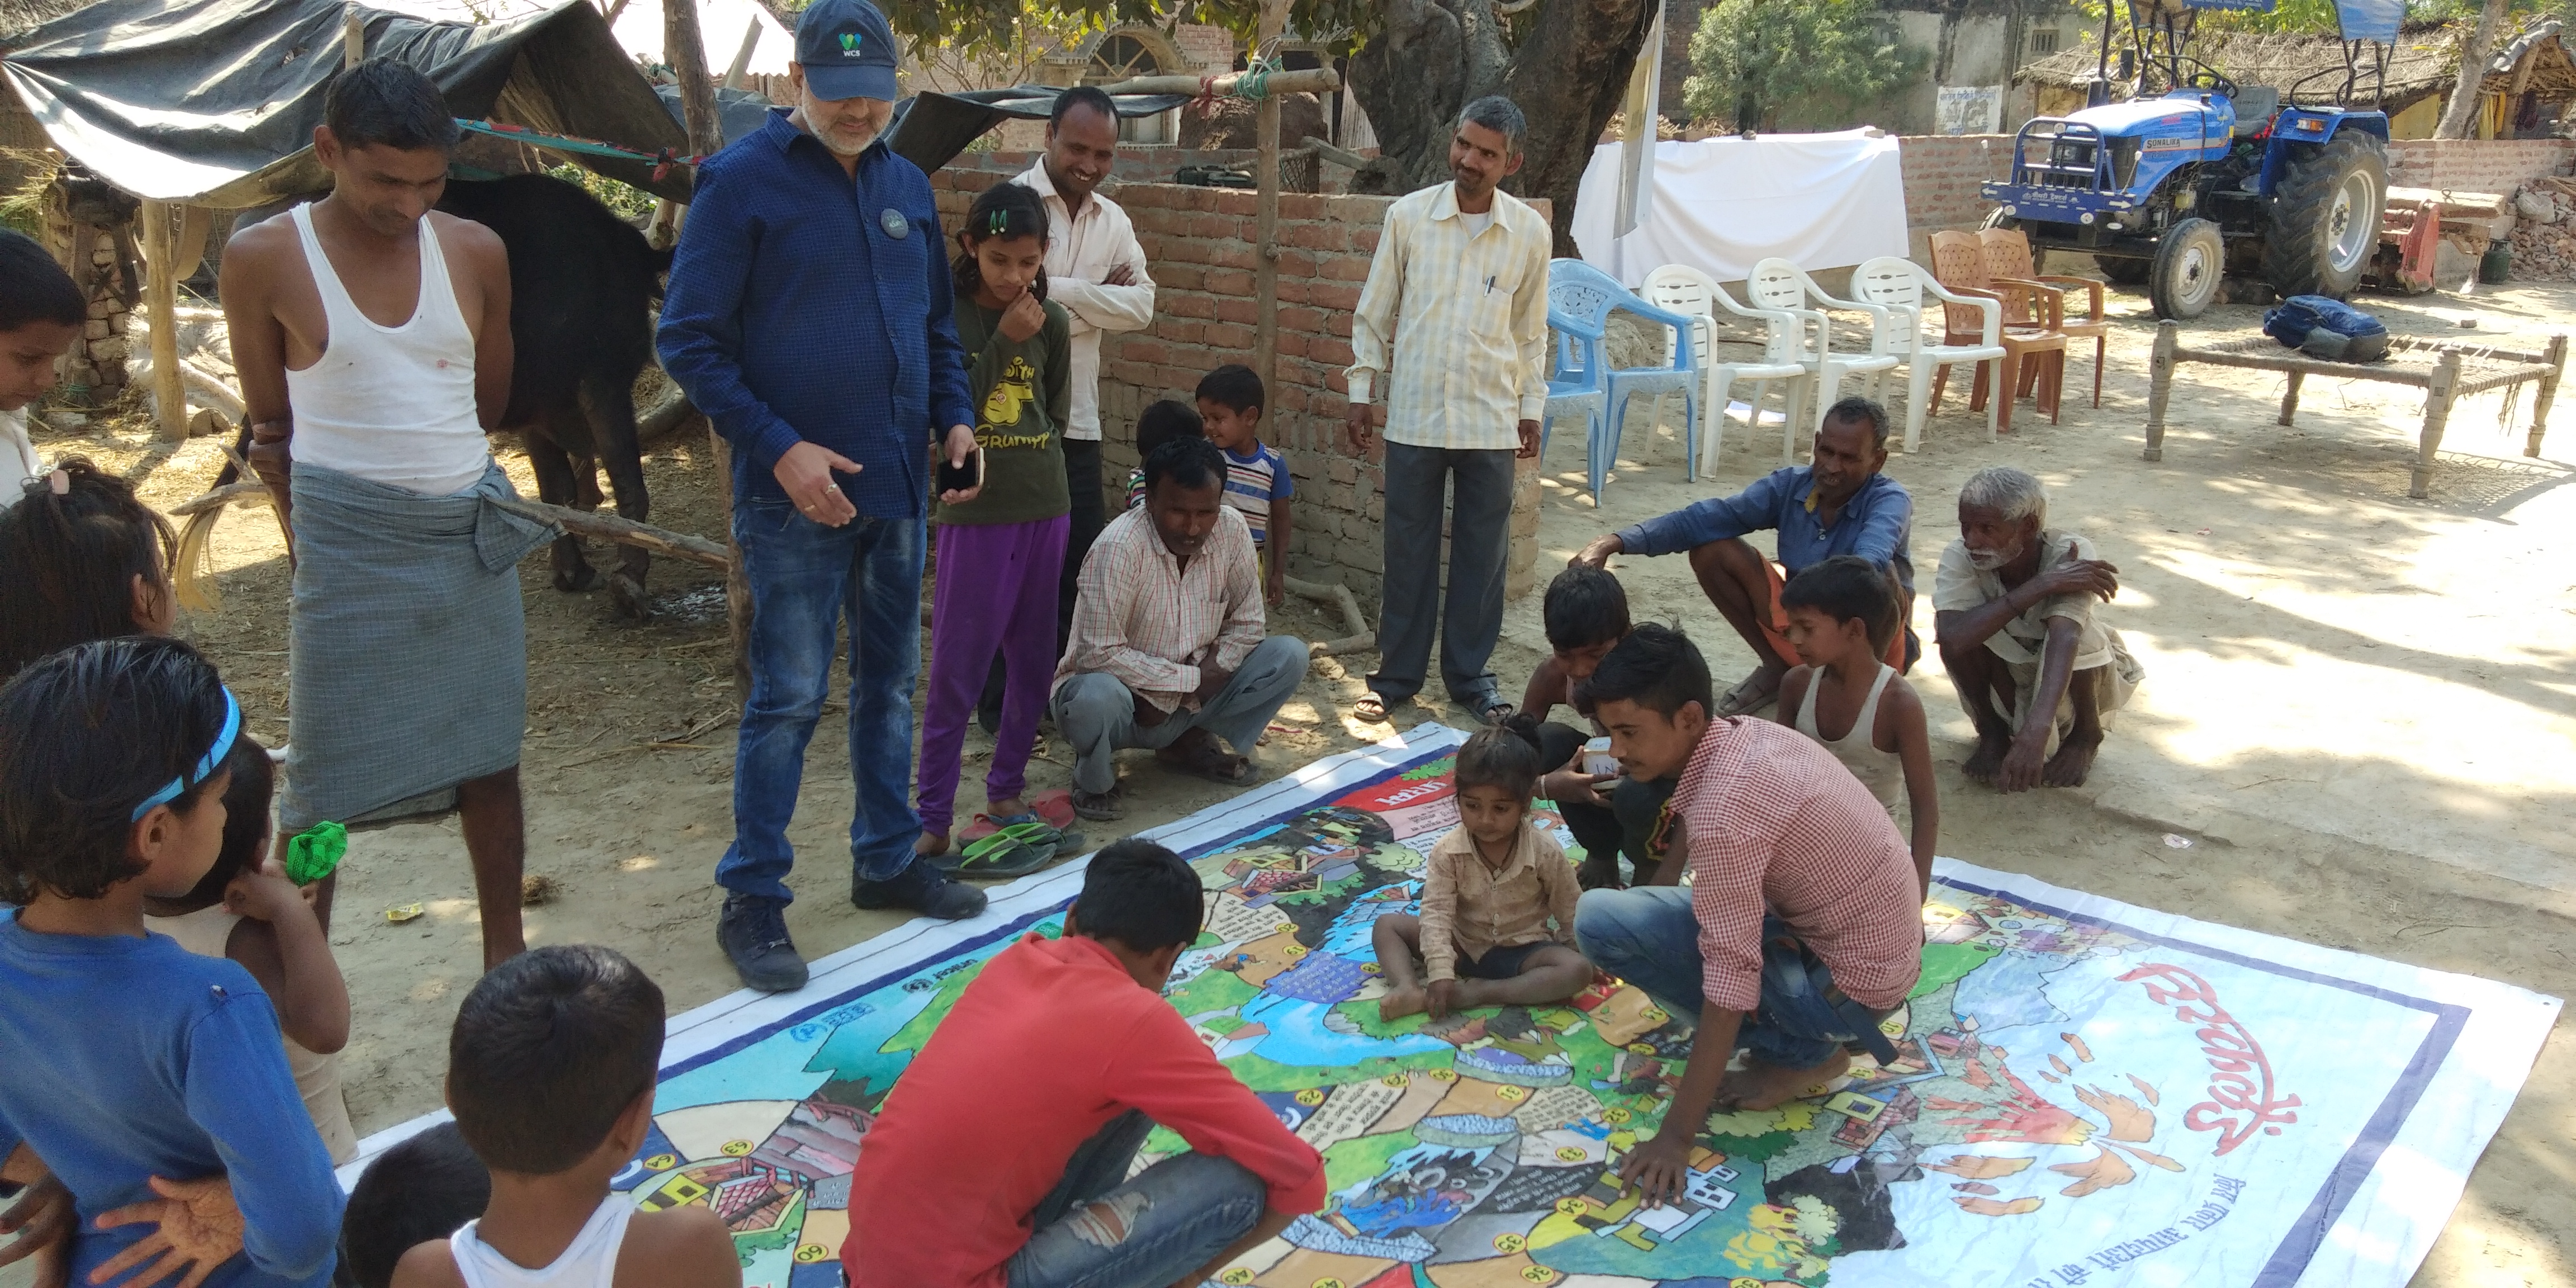 CEE Himalaya teaches community members about disaster risk reduction by playing the Riskland game.